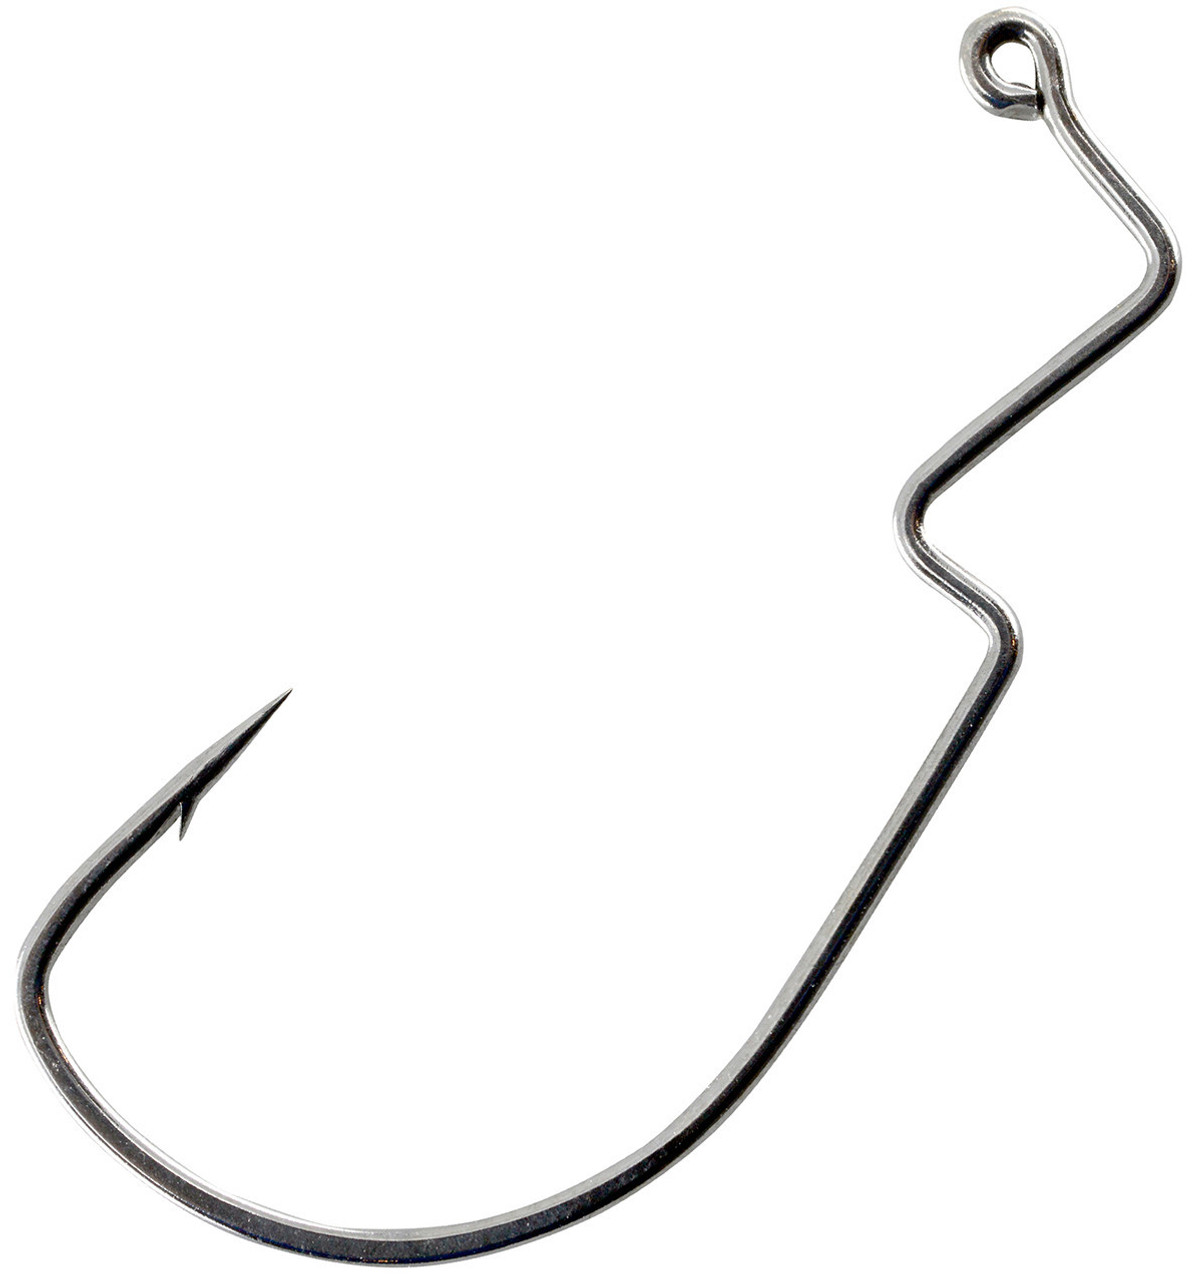  25 Gerry's Tackle 2X Strength Black Nickel 7384 Circle Hooks  Size 12/0 : Sports & Outdoors